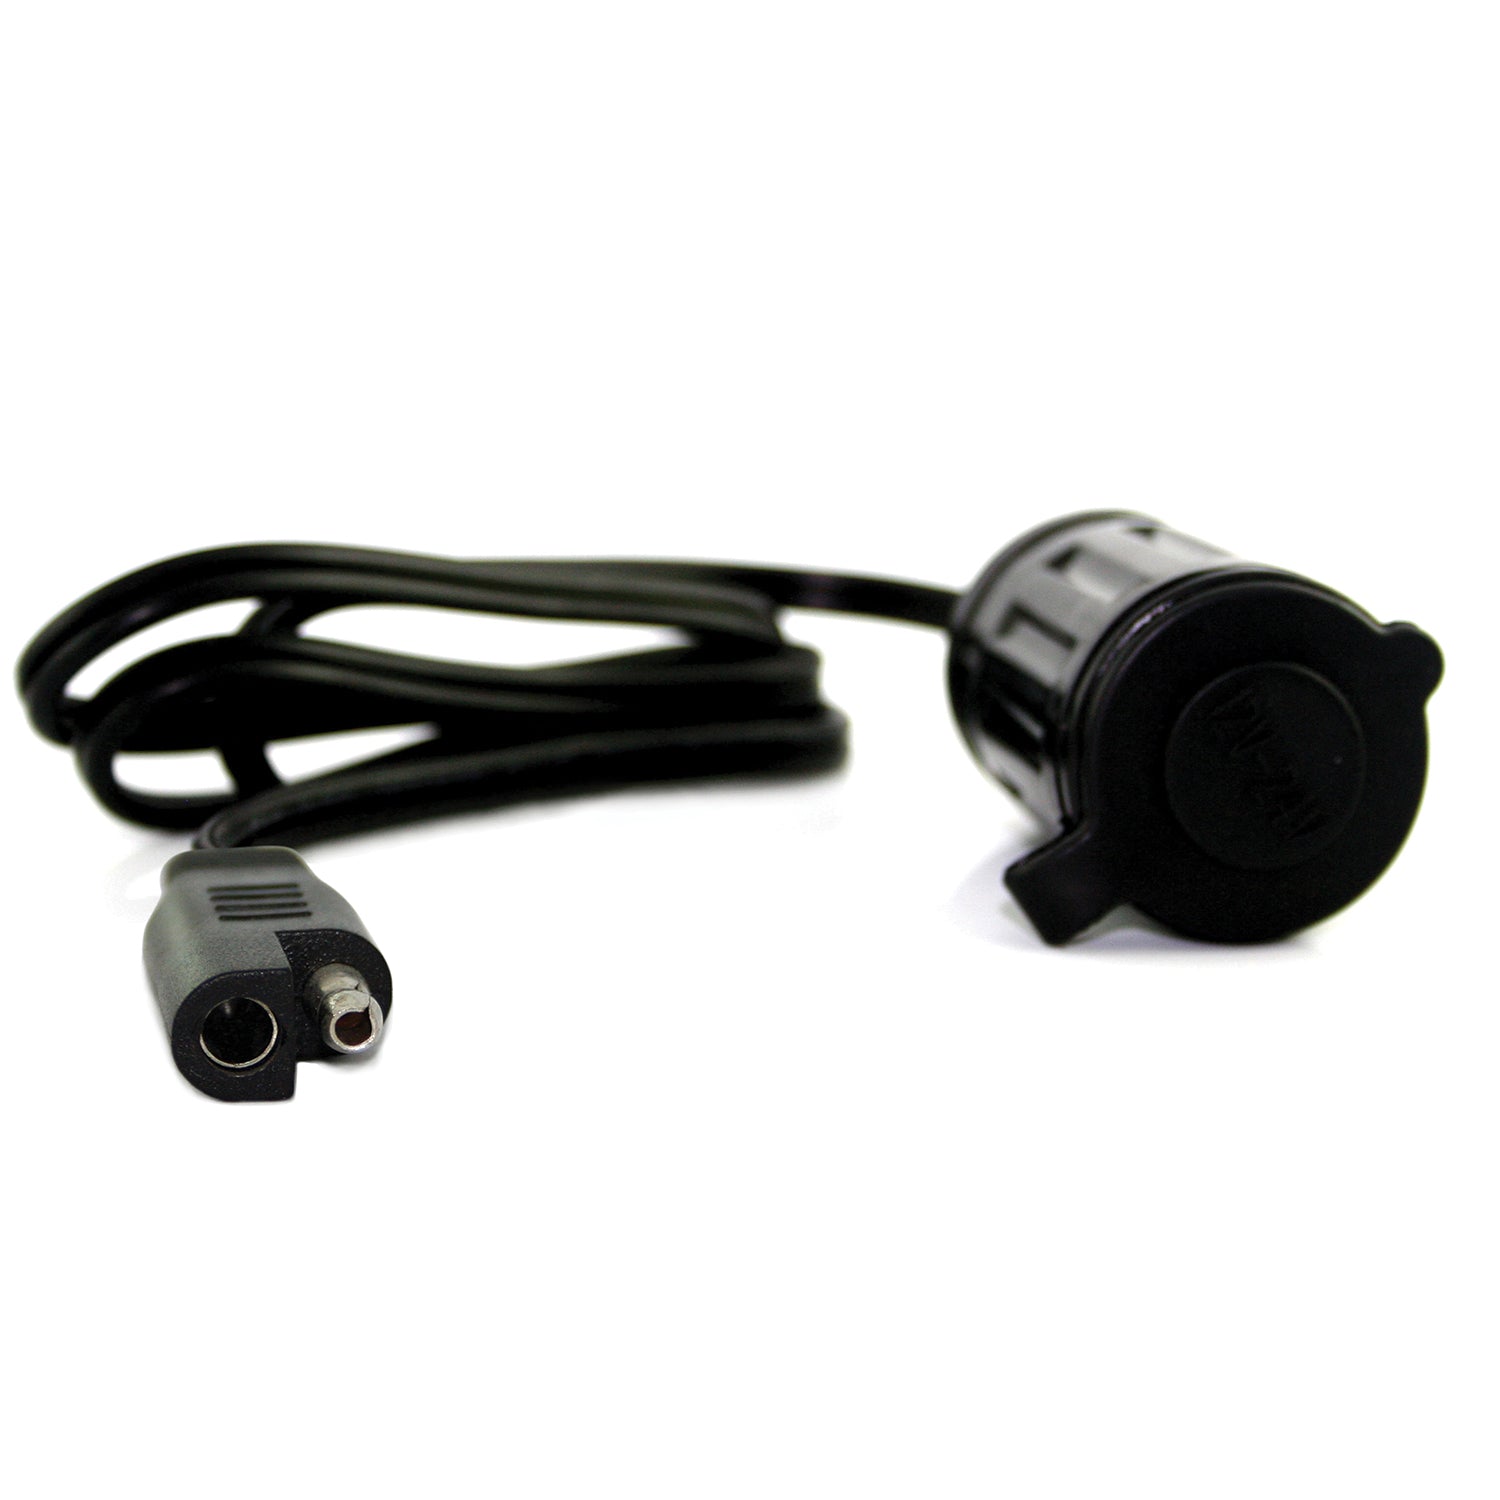 12V Keis heated clothing motorcycle cigarette adaptor for SAE plug